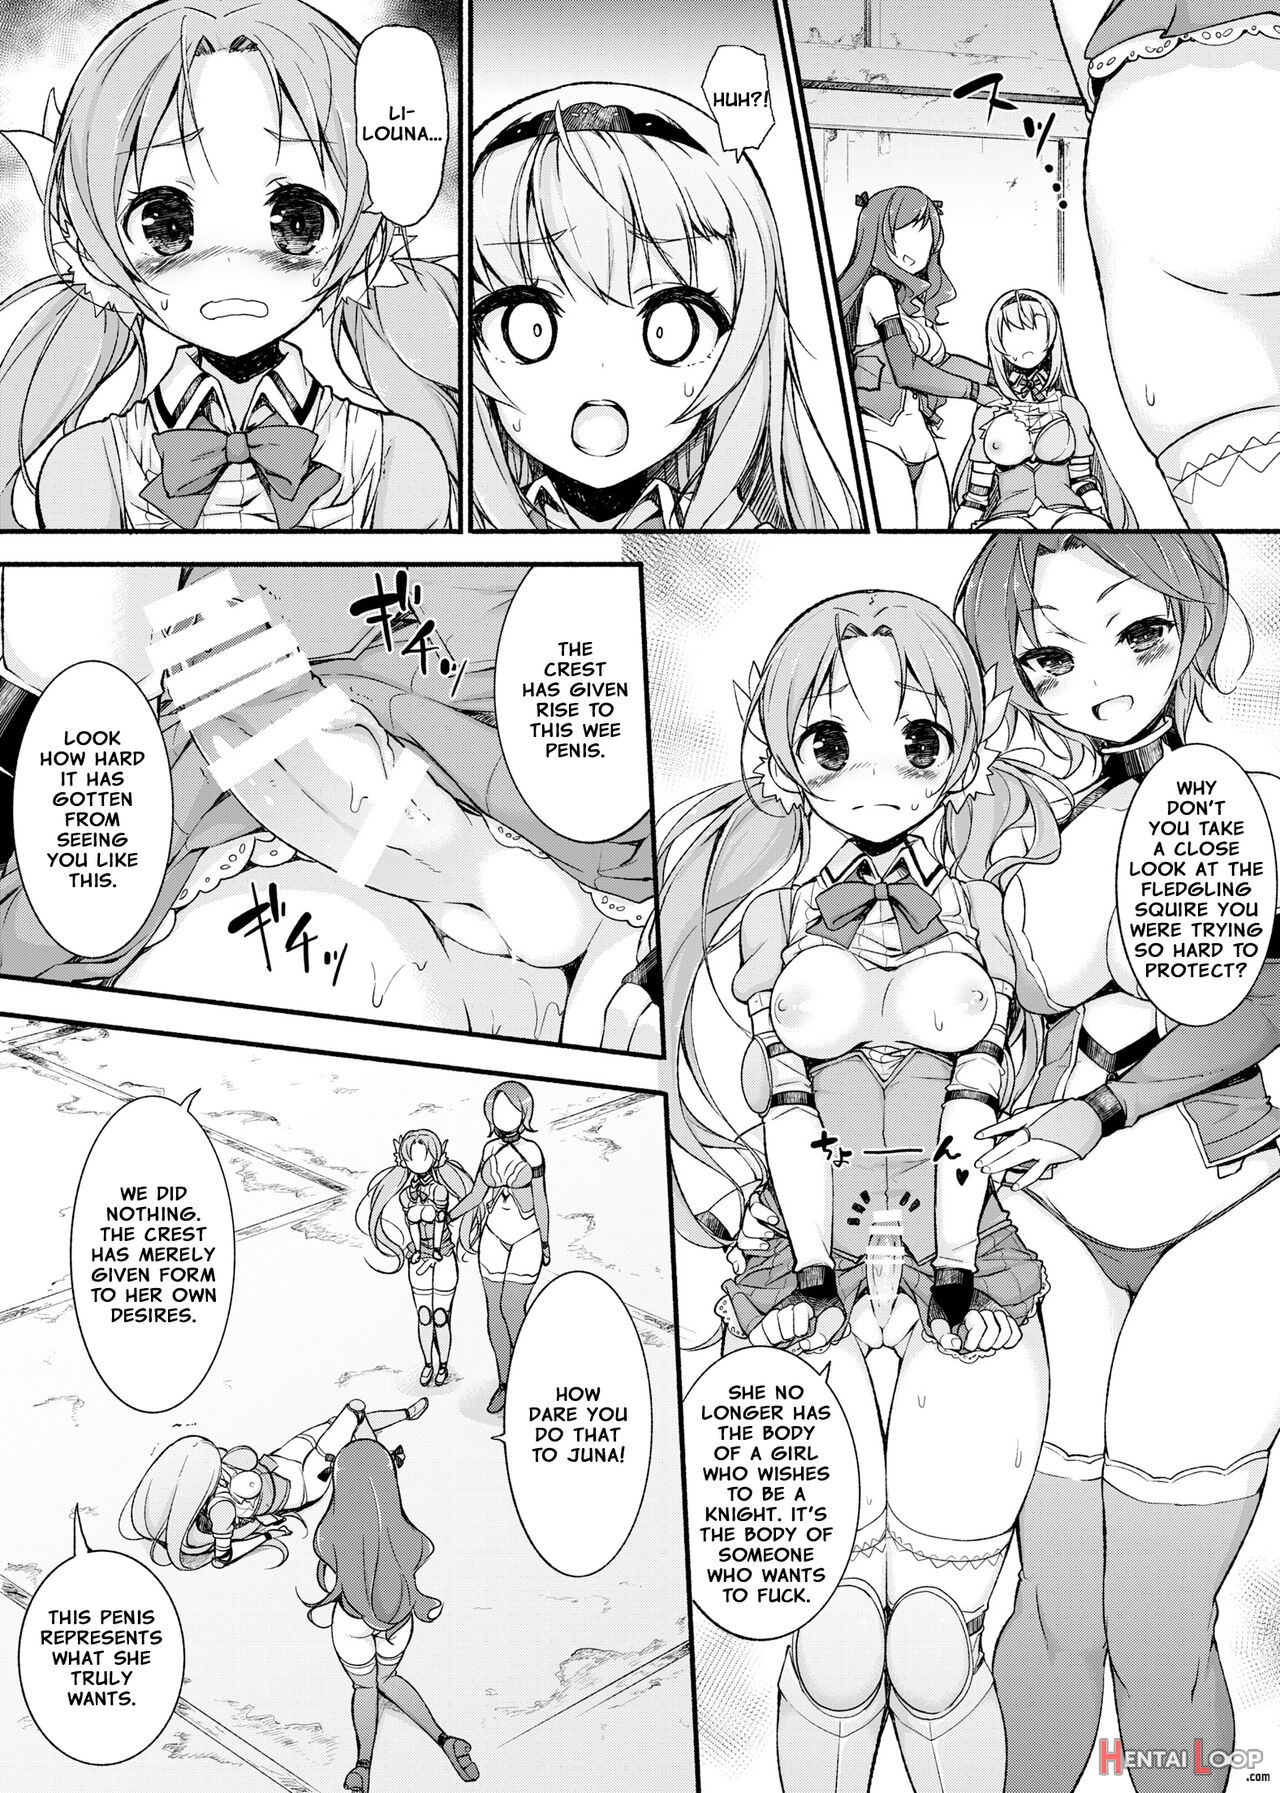 Maiden Knight Lilouna ~the Degenerate Knight-mage Academy Feud~ page 20